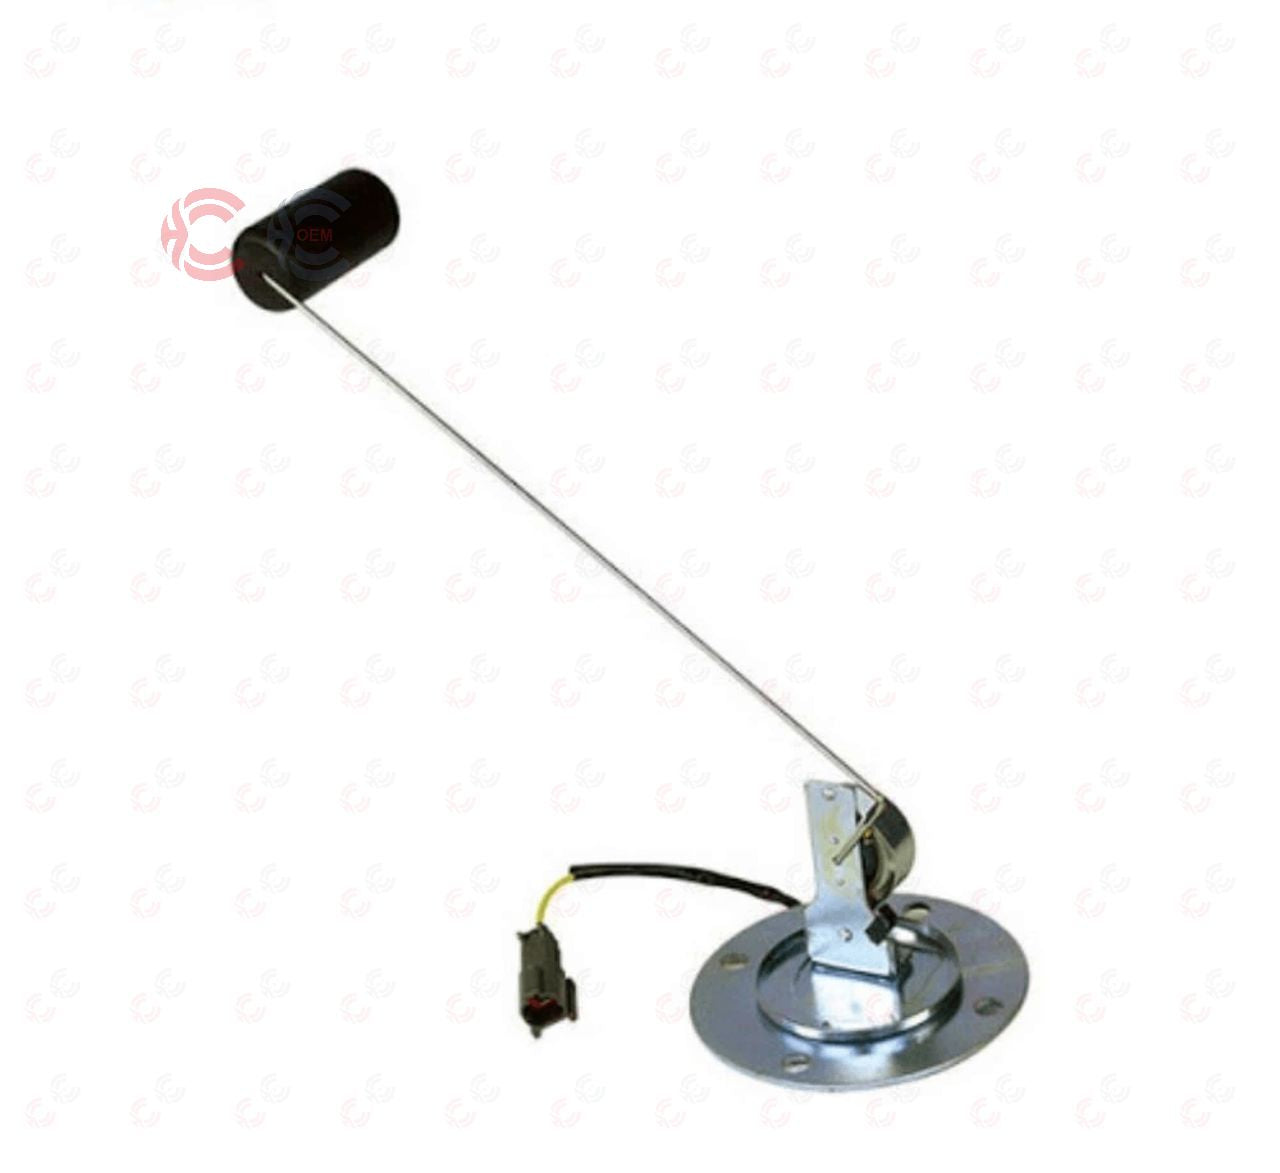 OEM: 7861924800Material: ABS metalColor: Black GoldenOrigin: Made in ChinaWeight: 1000gPacking List: 1* Fuel Level Sensor More ServiceWe can provide OEM Manufacturing serviceWe can Be your one-step solution for Auto PartsWe can provide technical scheme for you Feel Free to Contact Us, we will get back to you as soon as possible.